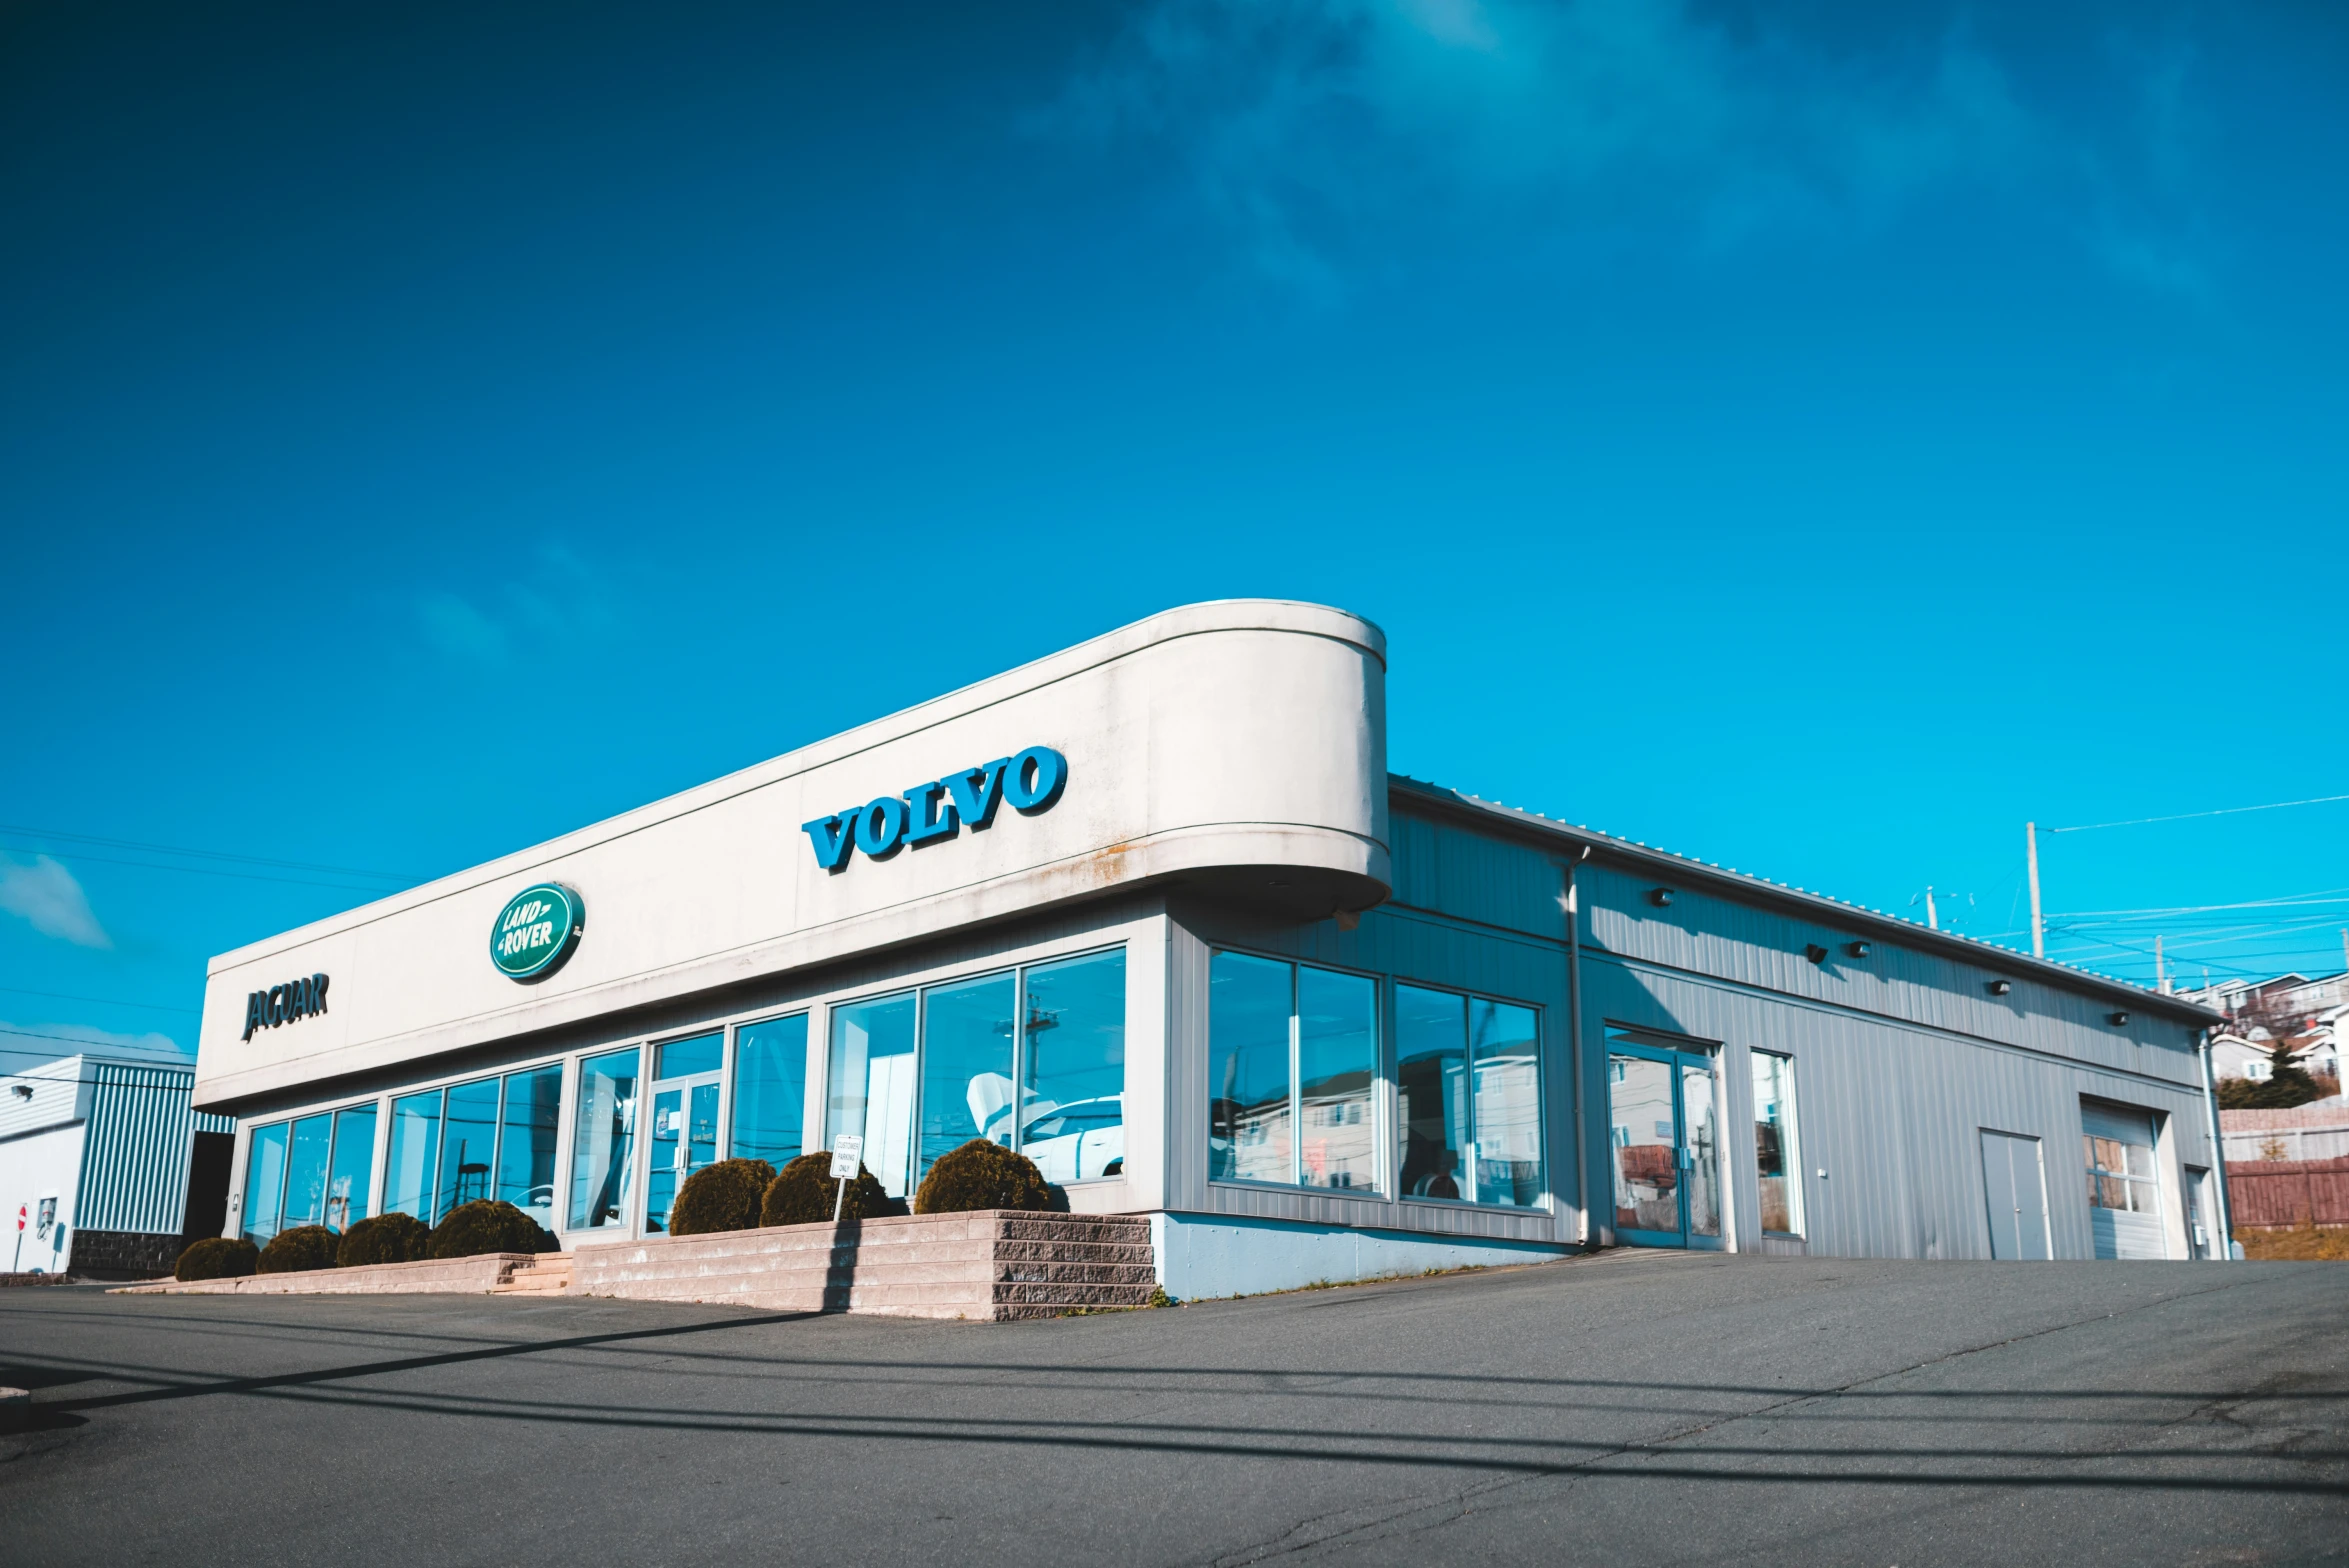 a volvo car repair shop is shown from the side